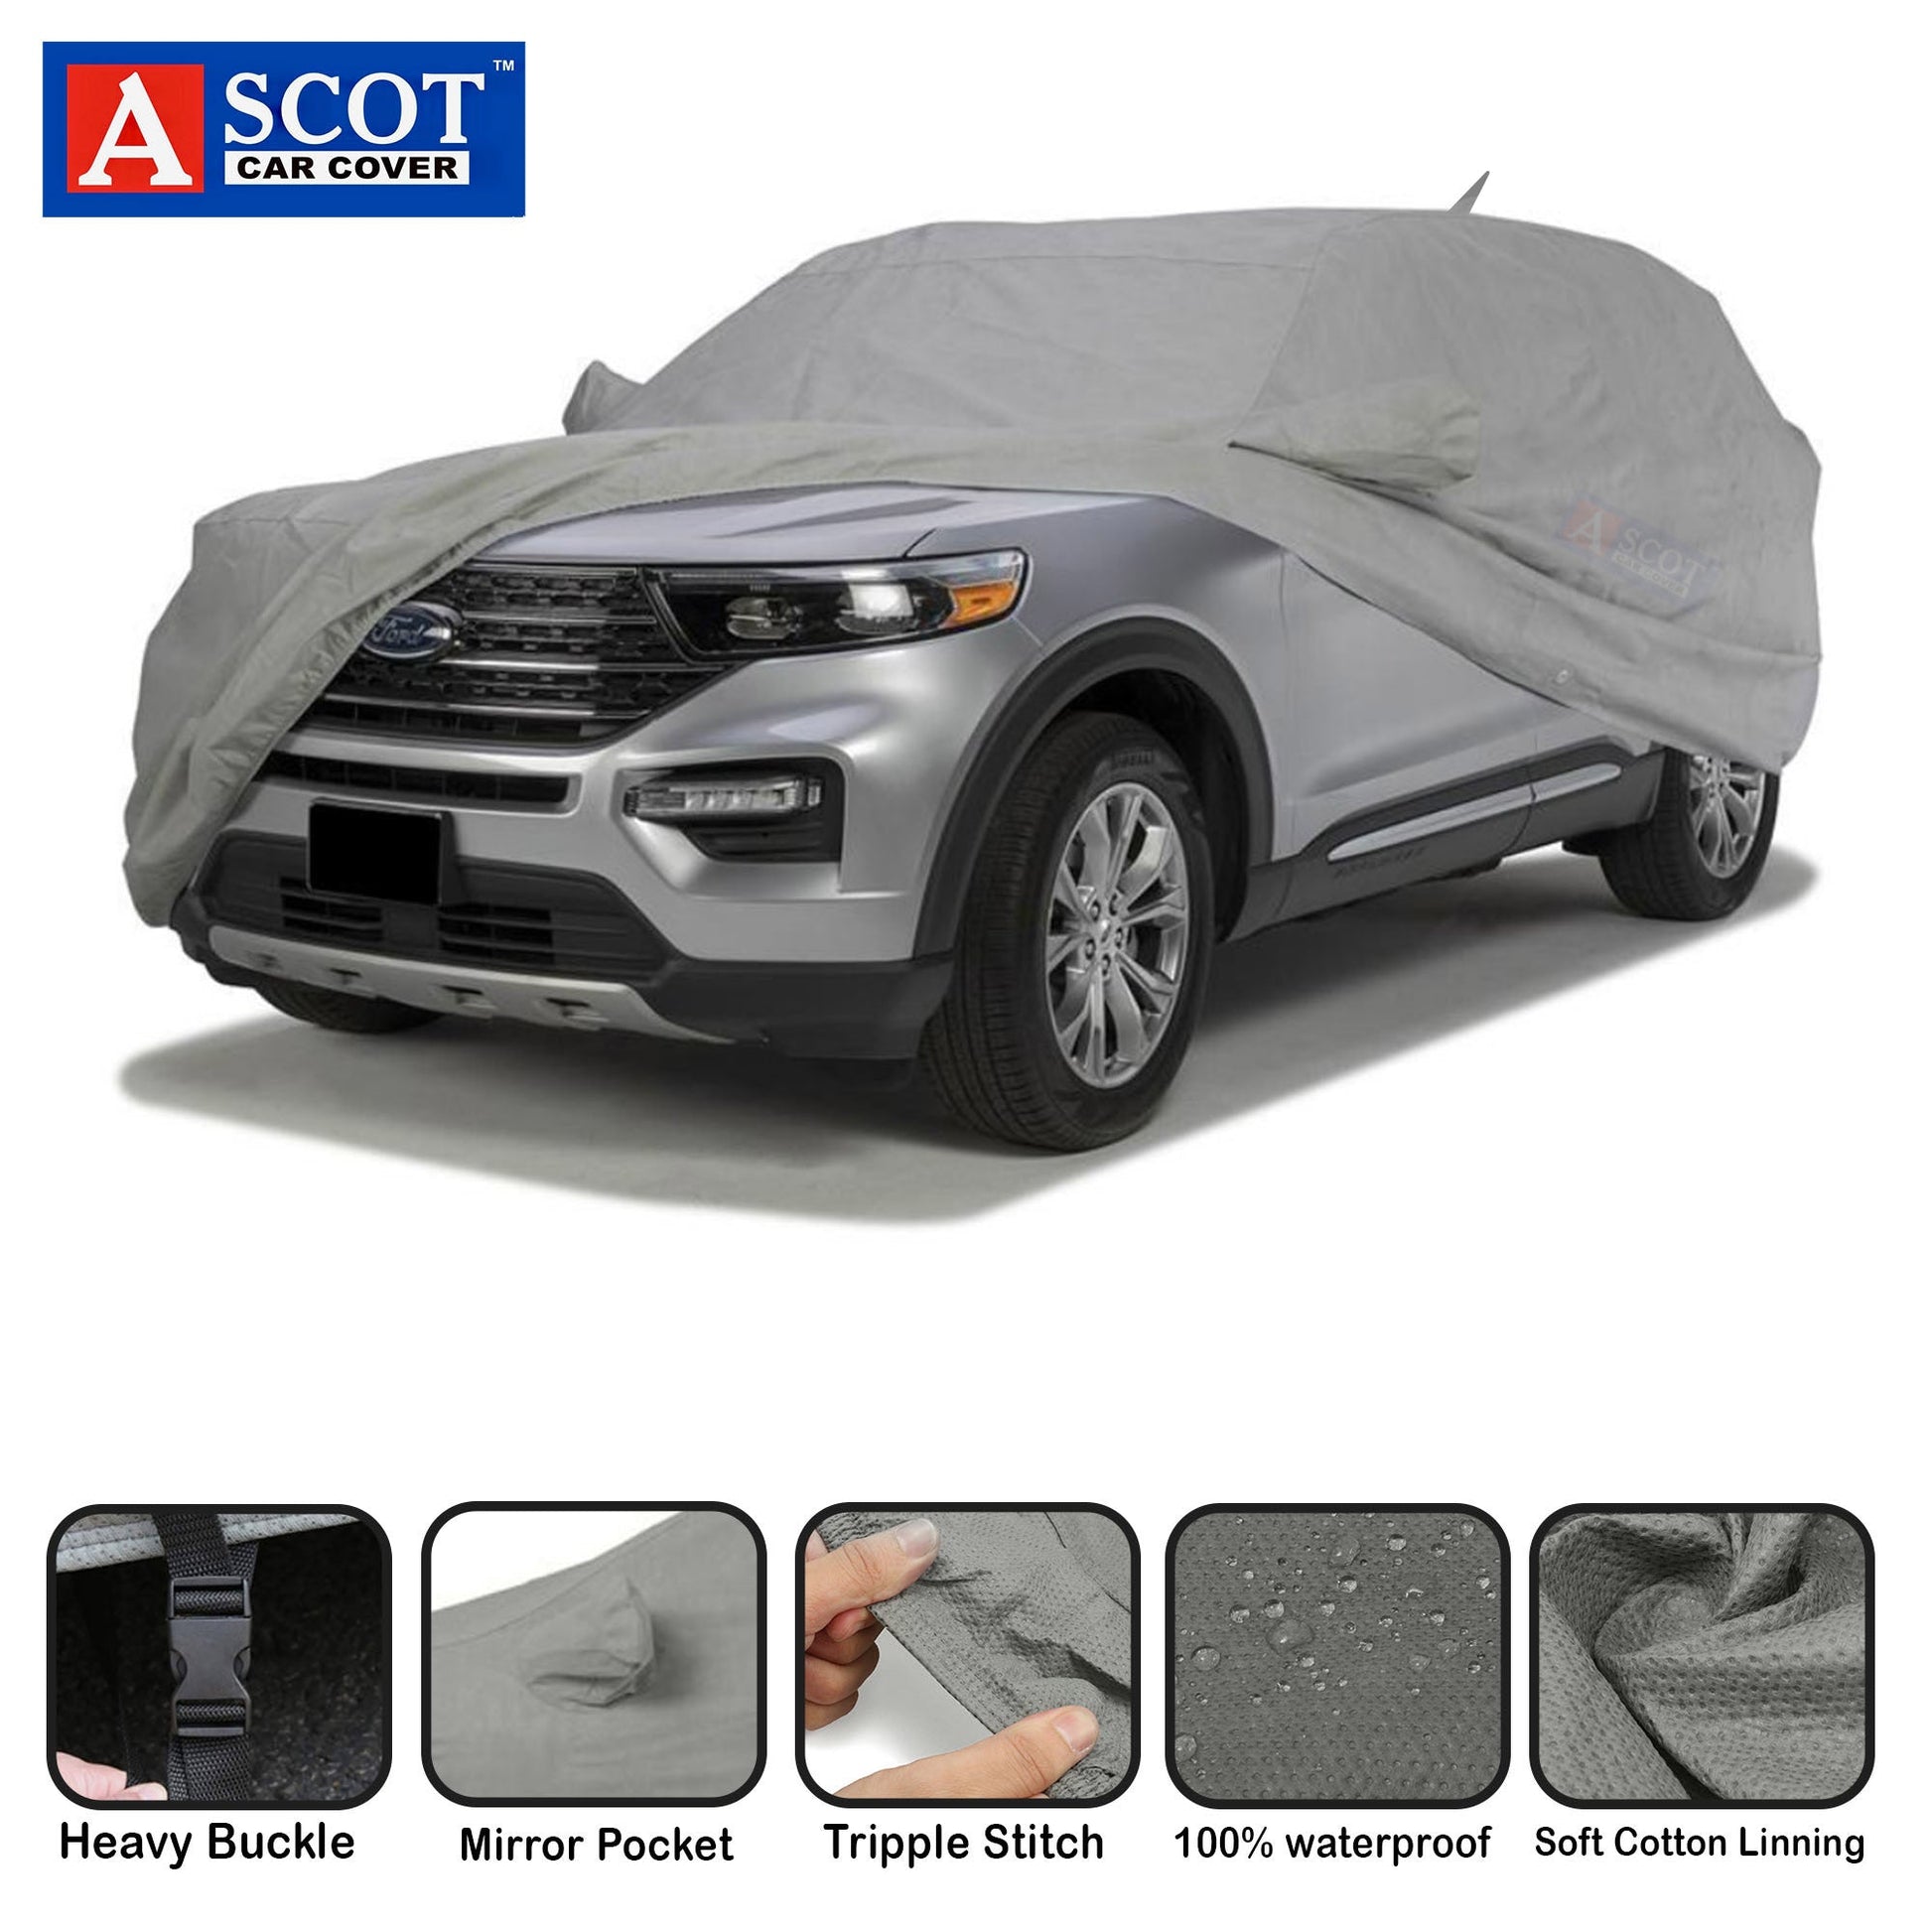  Car Cover Waterproof Compatible with Nissan Micra